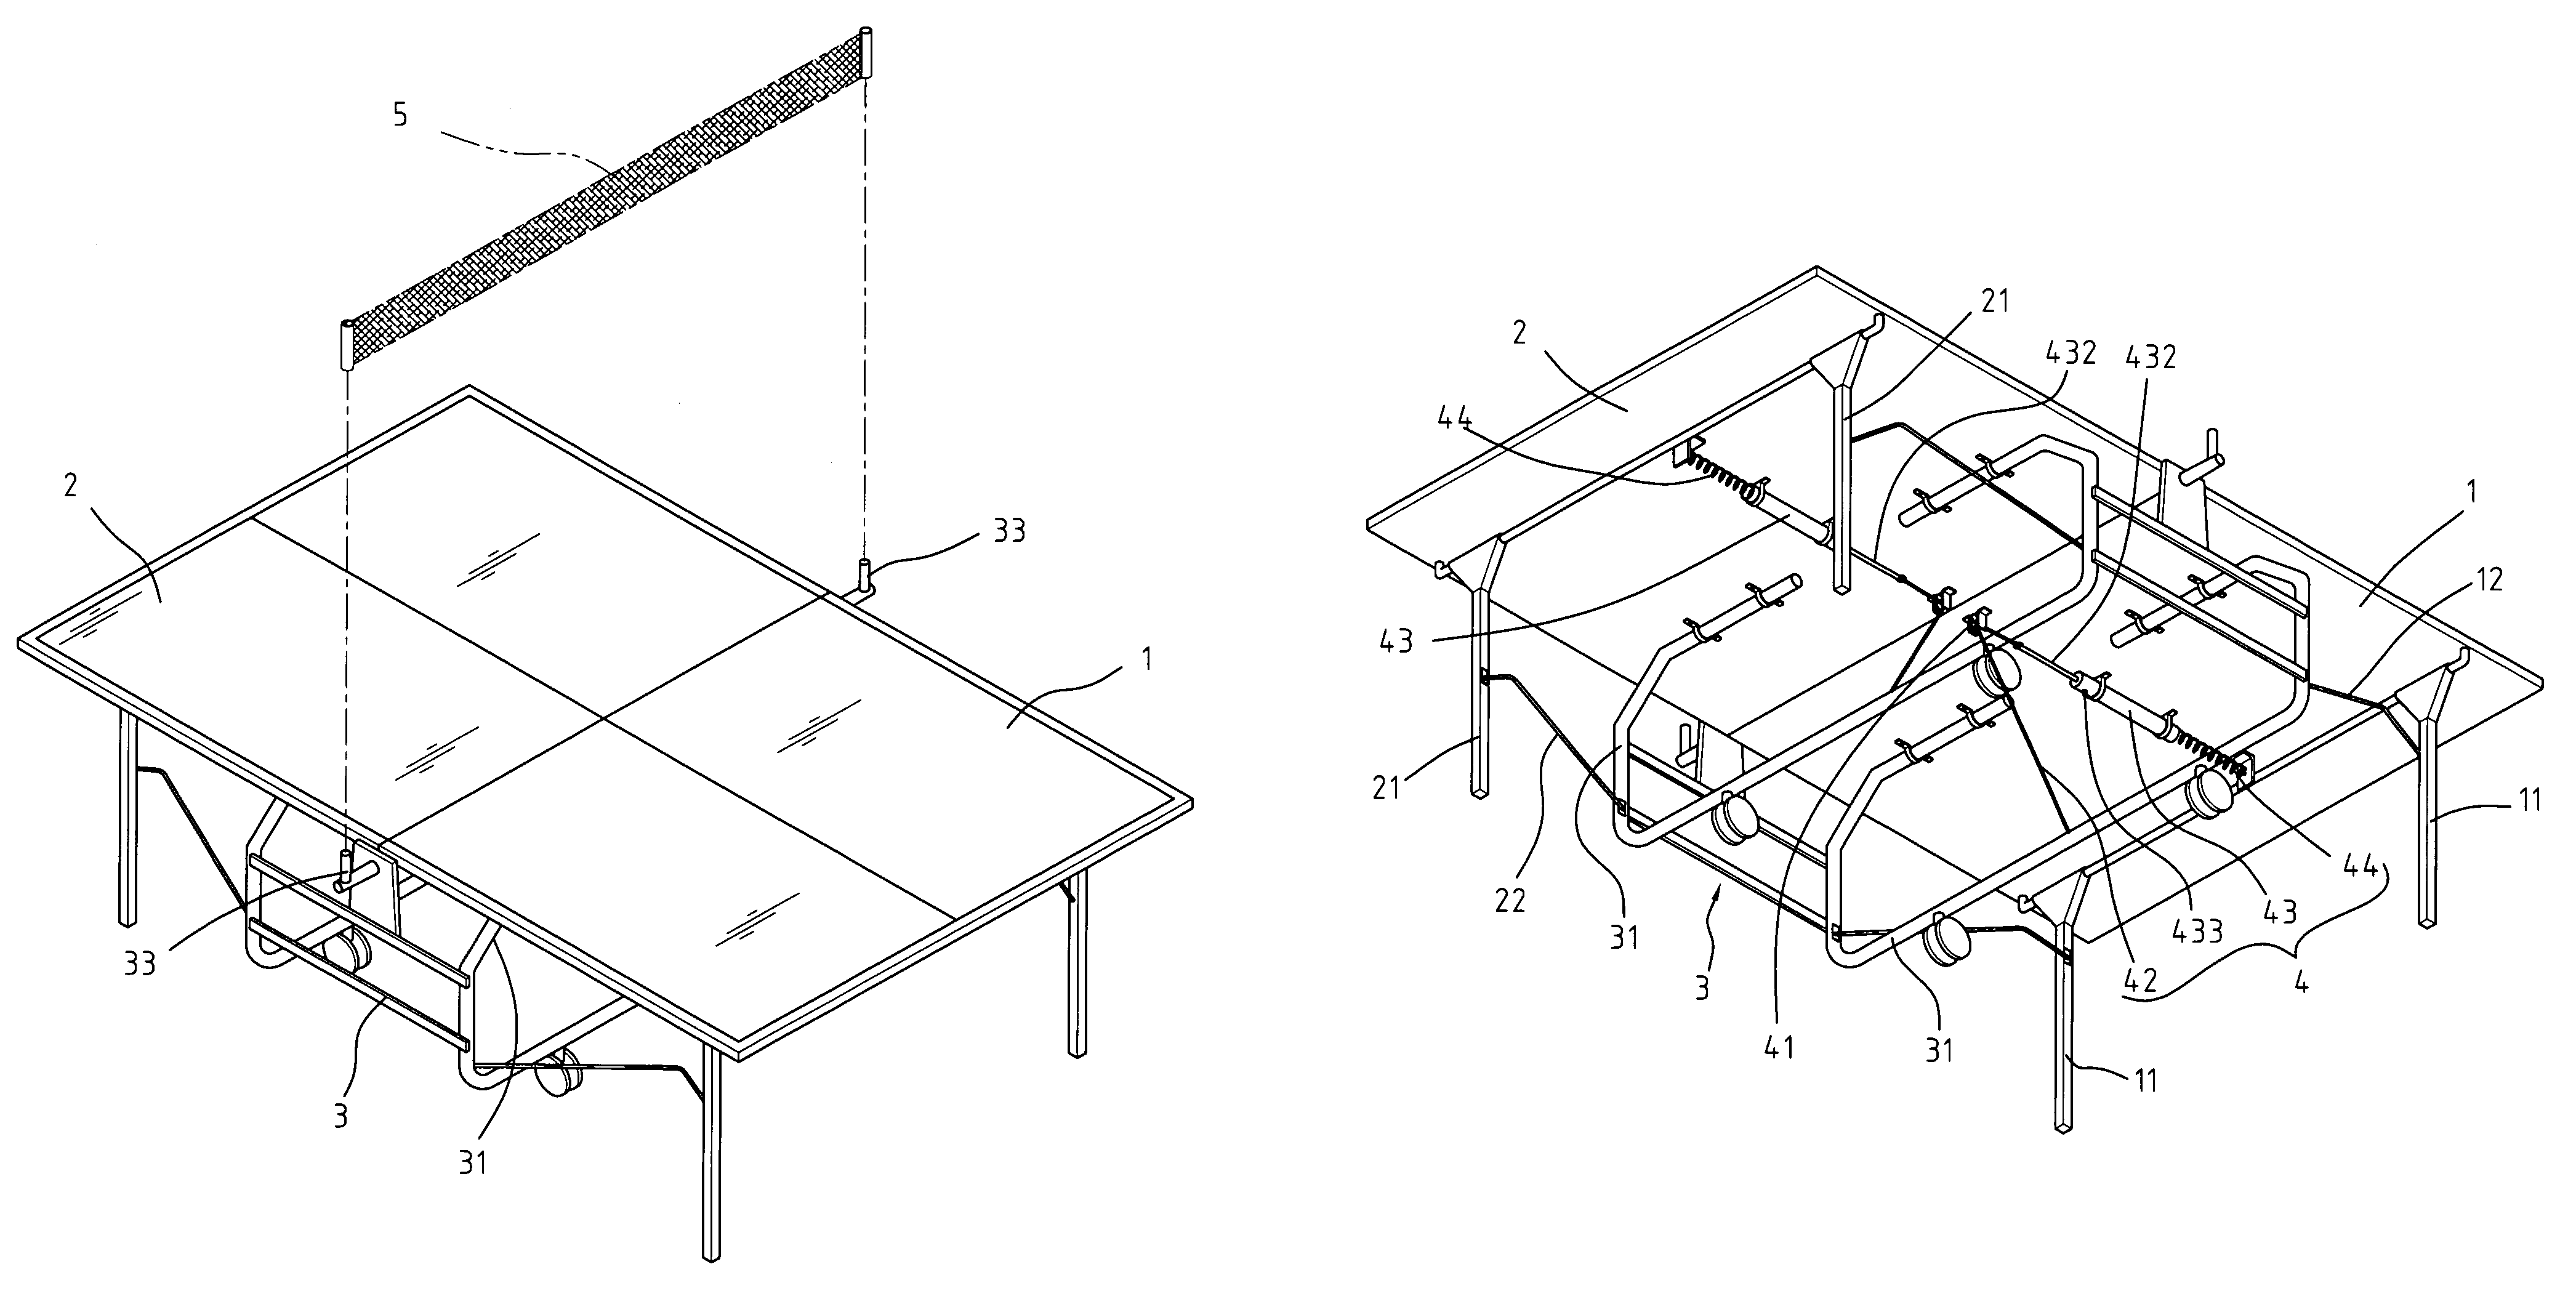 Ping pong table with folding protection mechanism